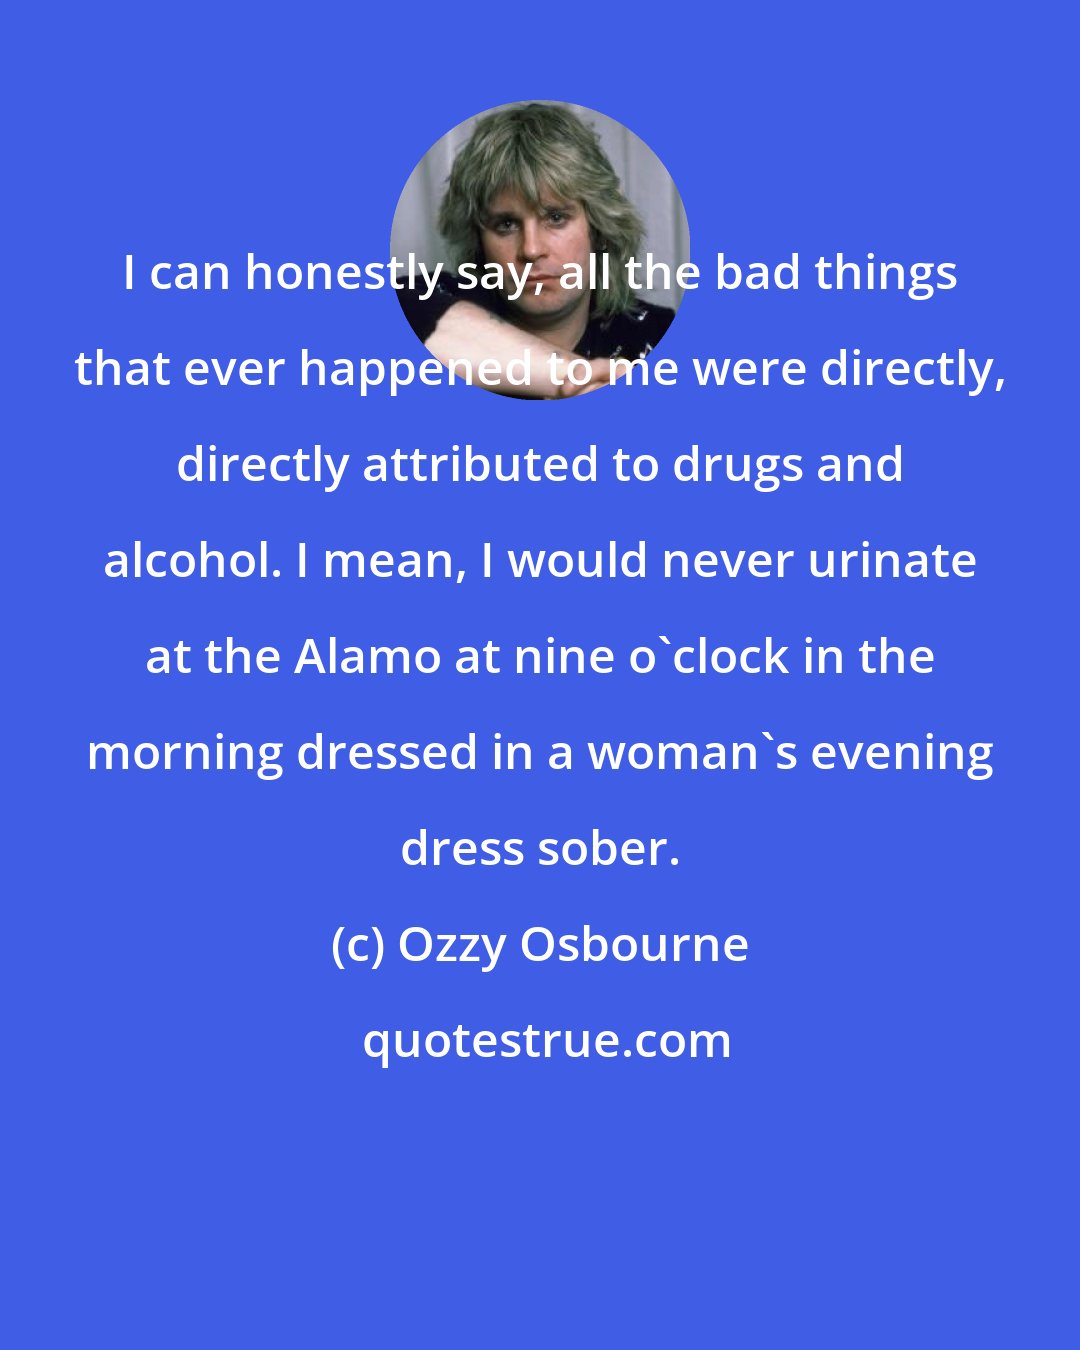 Ozzy Osbourne: I can honestly say, all the bad things that ever happened to me were directly, directly attributed to drugs and alcohol. I mean, I would never urinate at the Alamo at nine o'clock in the morning dressed in a woman's evening dress sober.